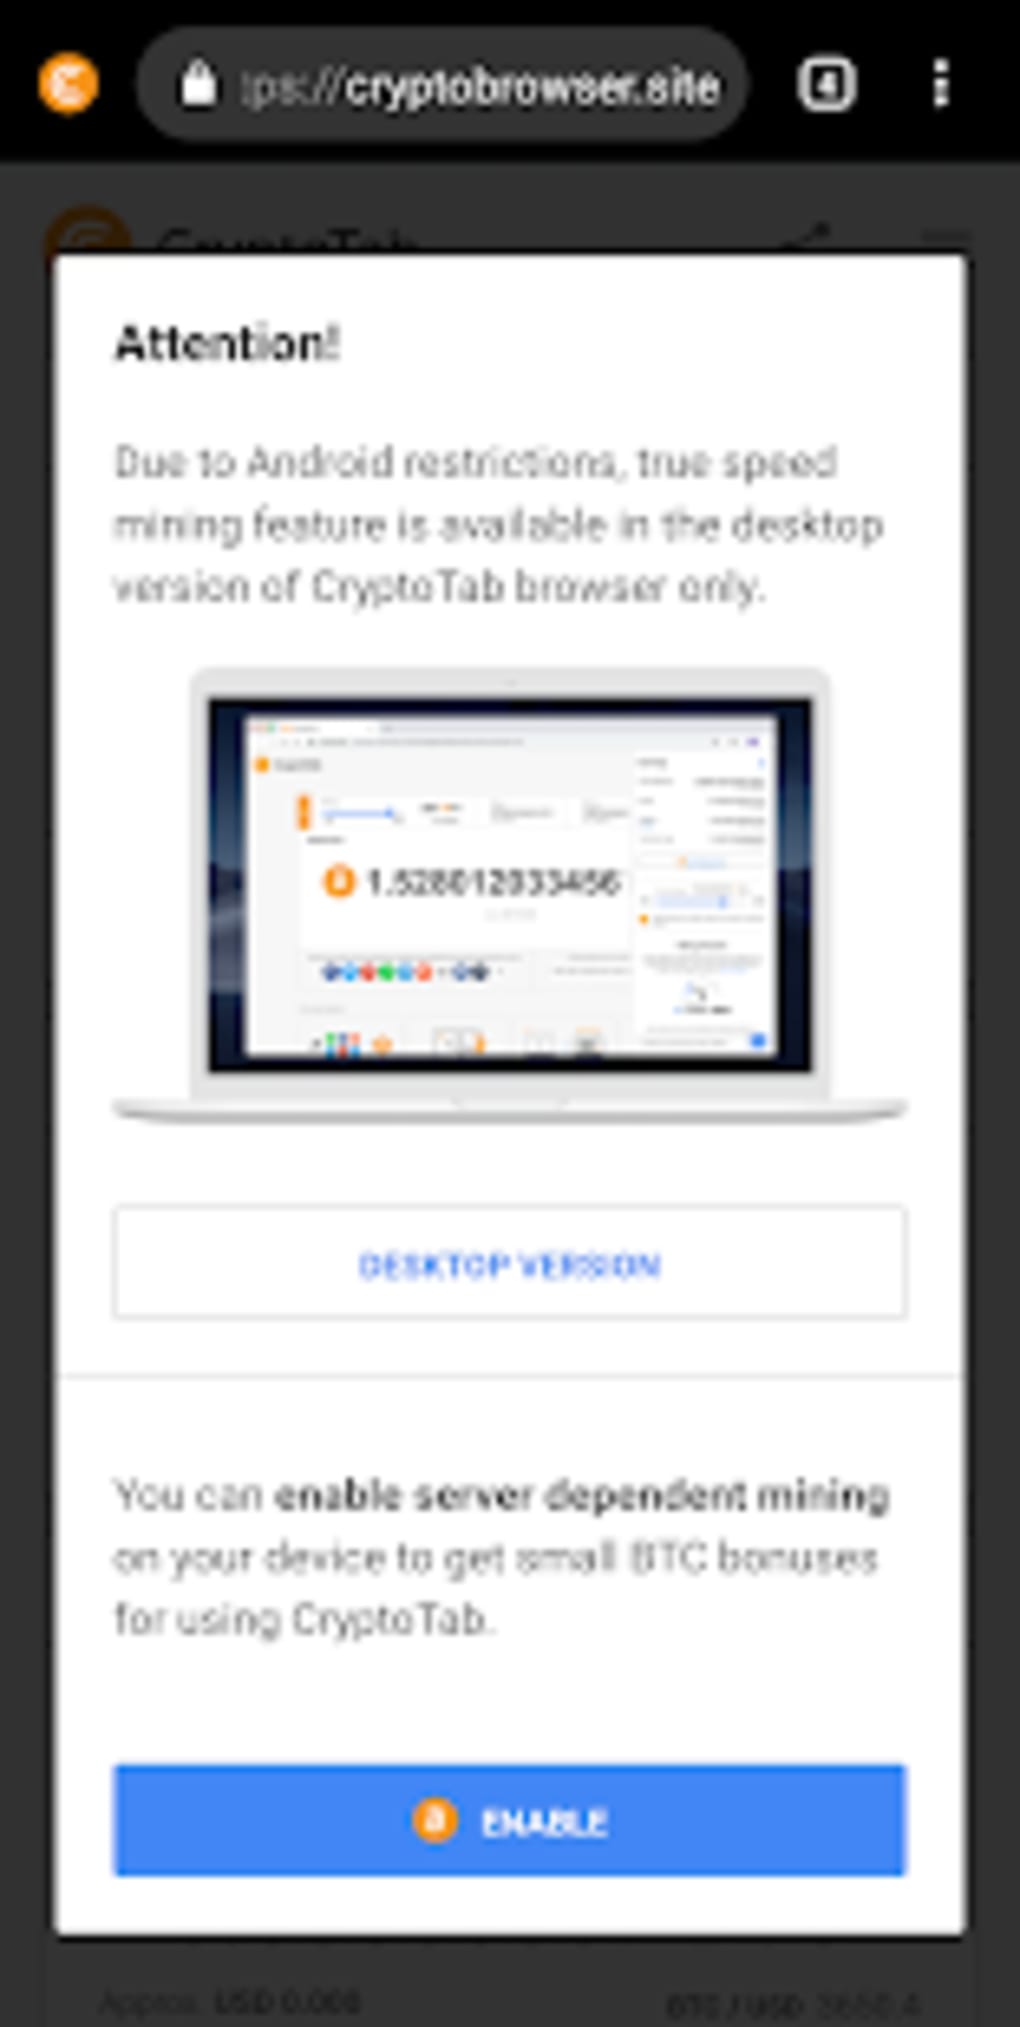 crypto tab browser 94fbr